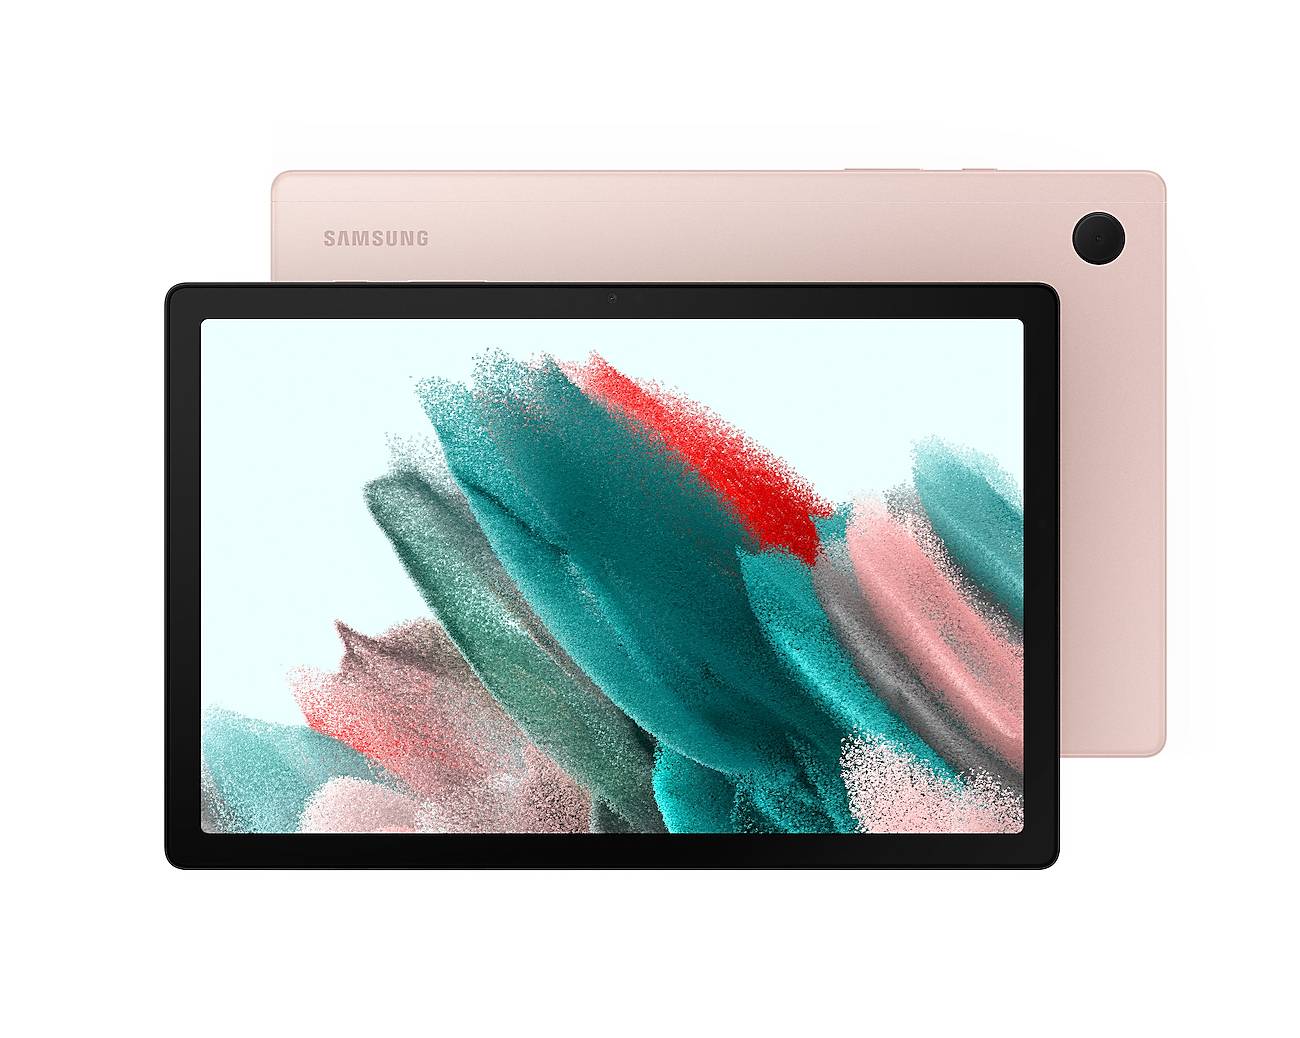 Rca Informatique - Image du produit : GALAXY TAB A8UNISOC T618 OCTO 128GB 4GB 10.5IN PINK GOLD AN 11